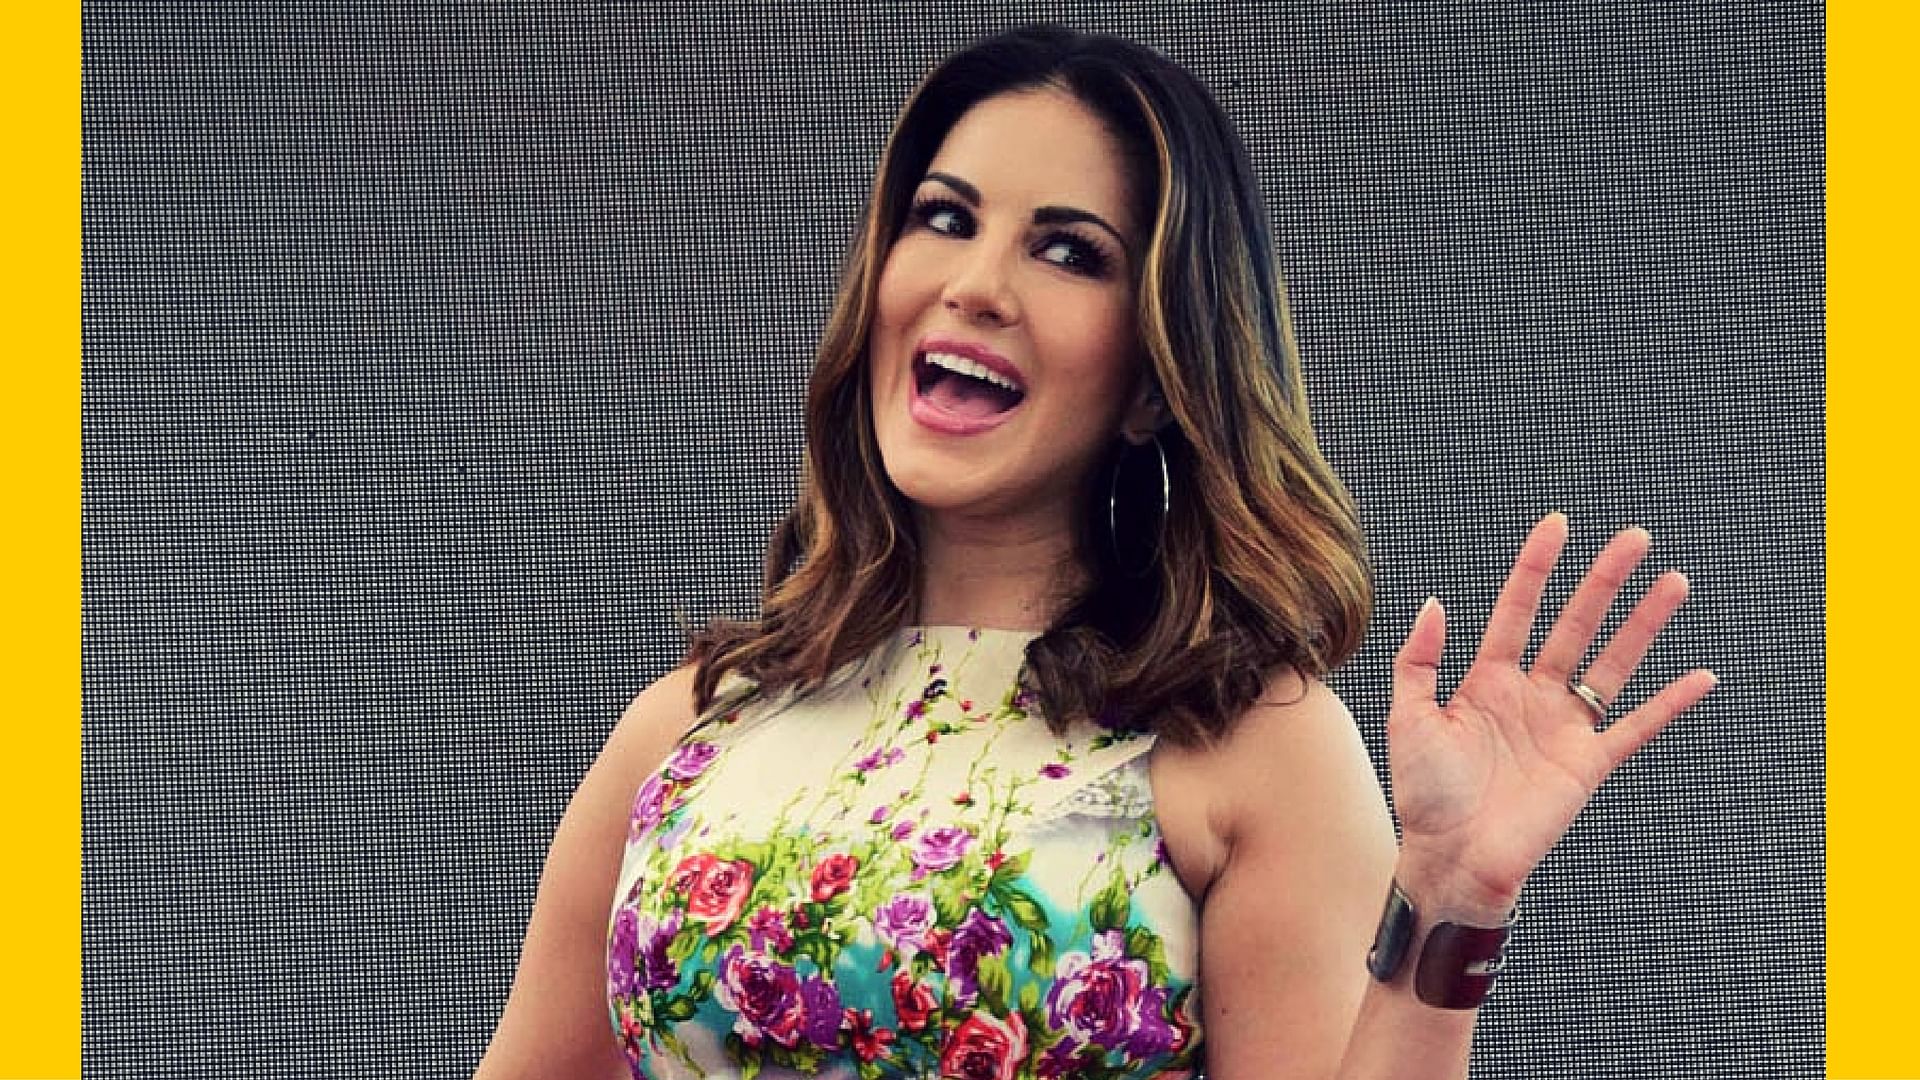 Birthday Girl Sunny Leone Brings Out the Hypocrites in Us